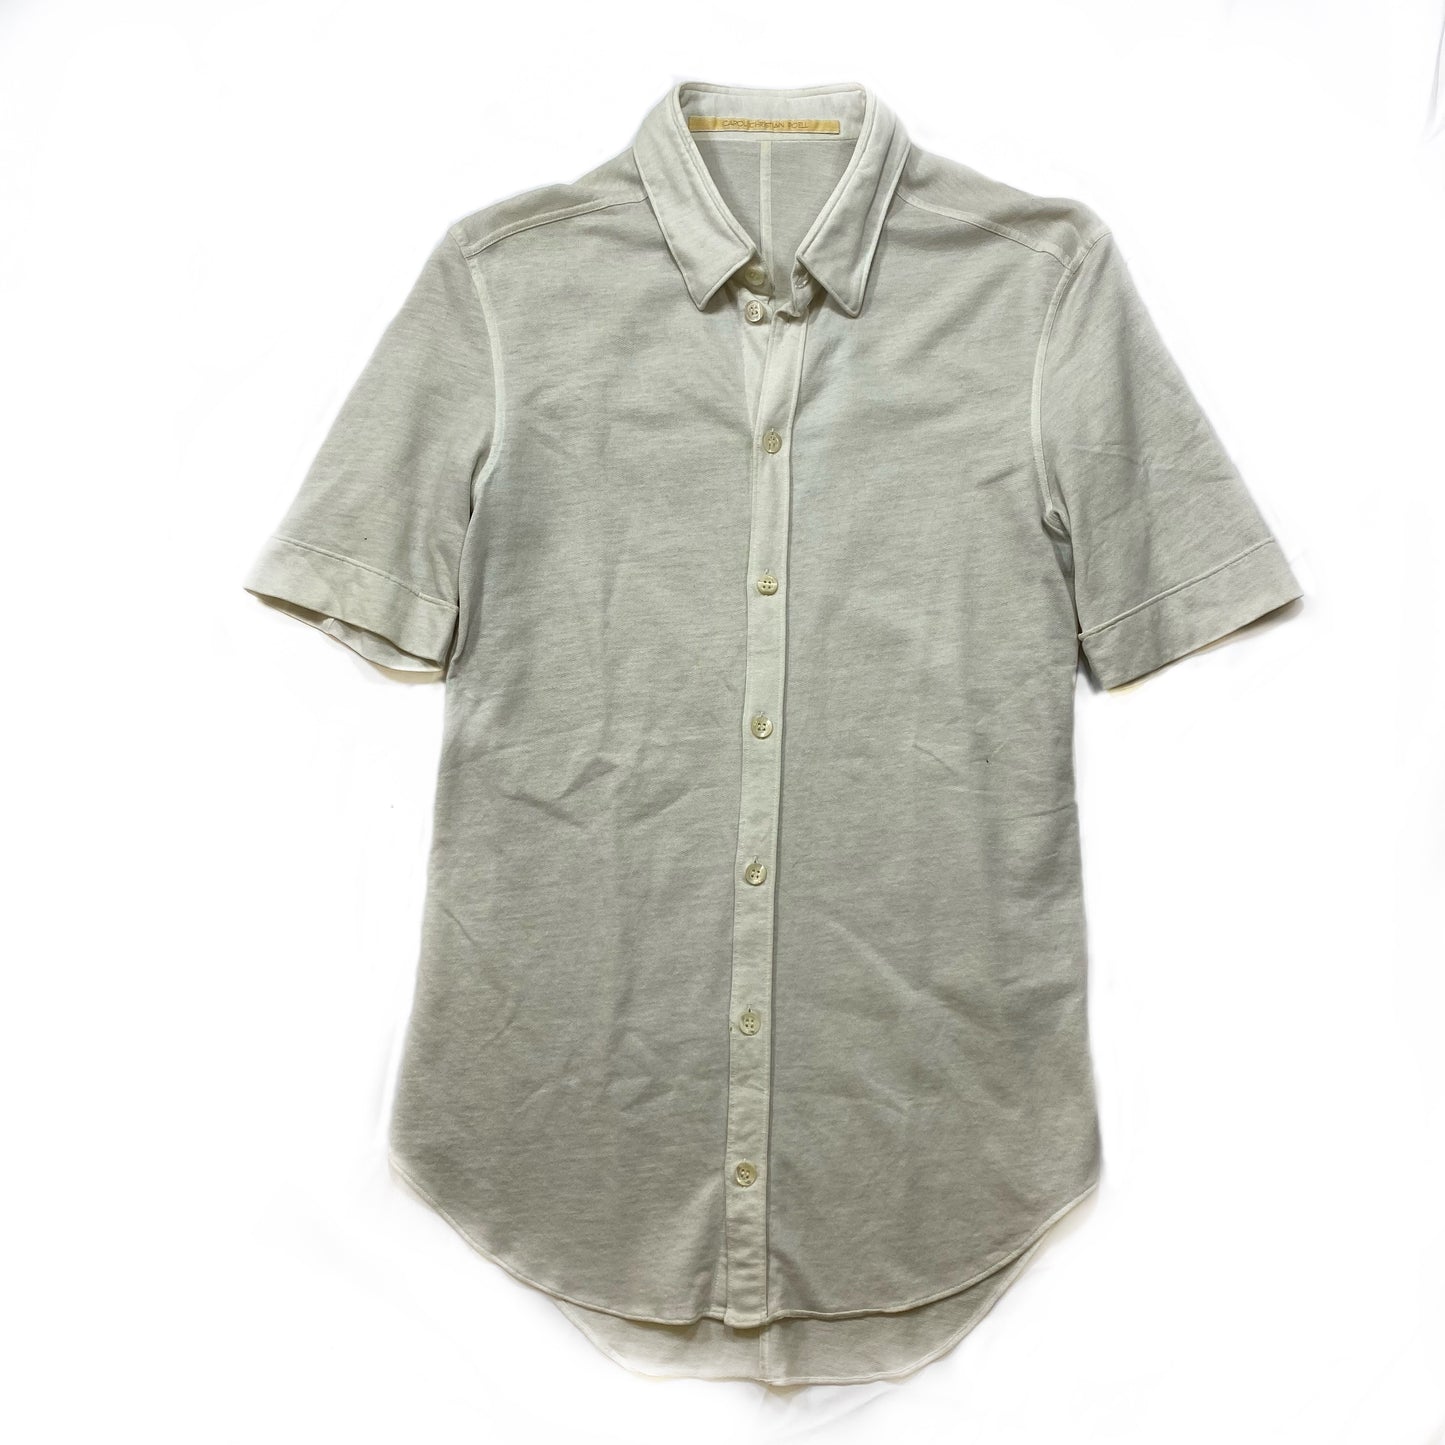 Carol Christian Poell cotton short sleeve button-up 46